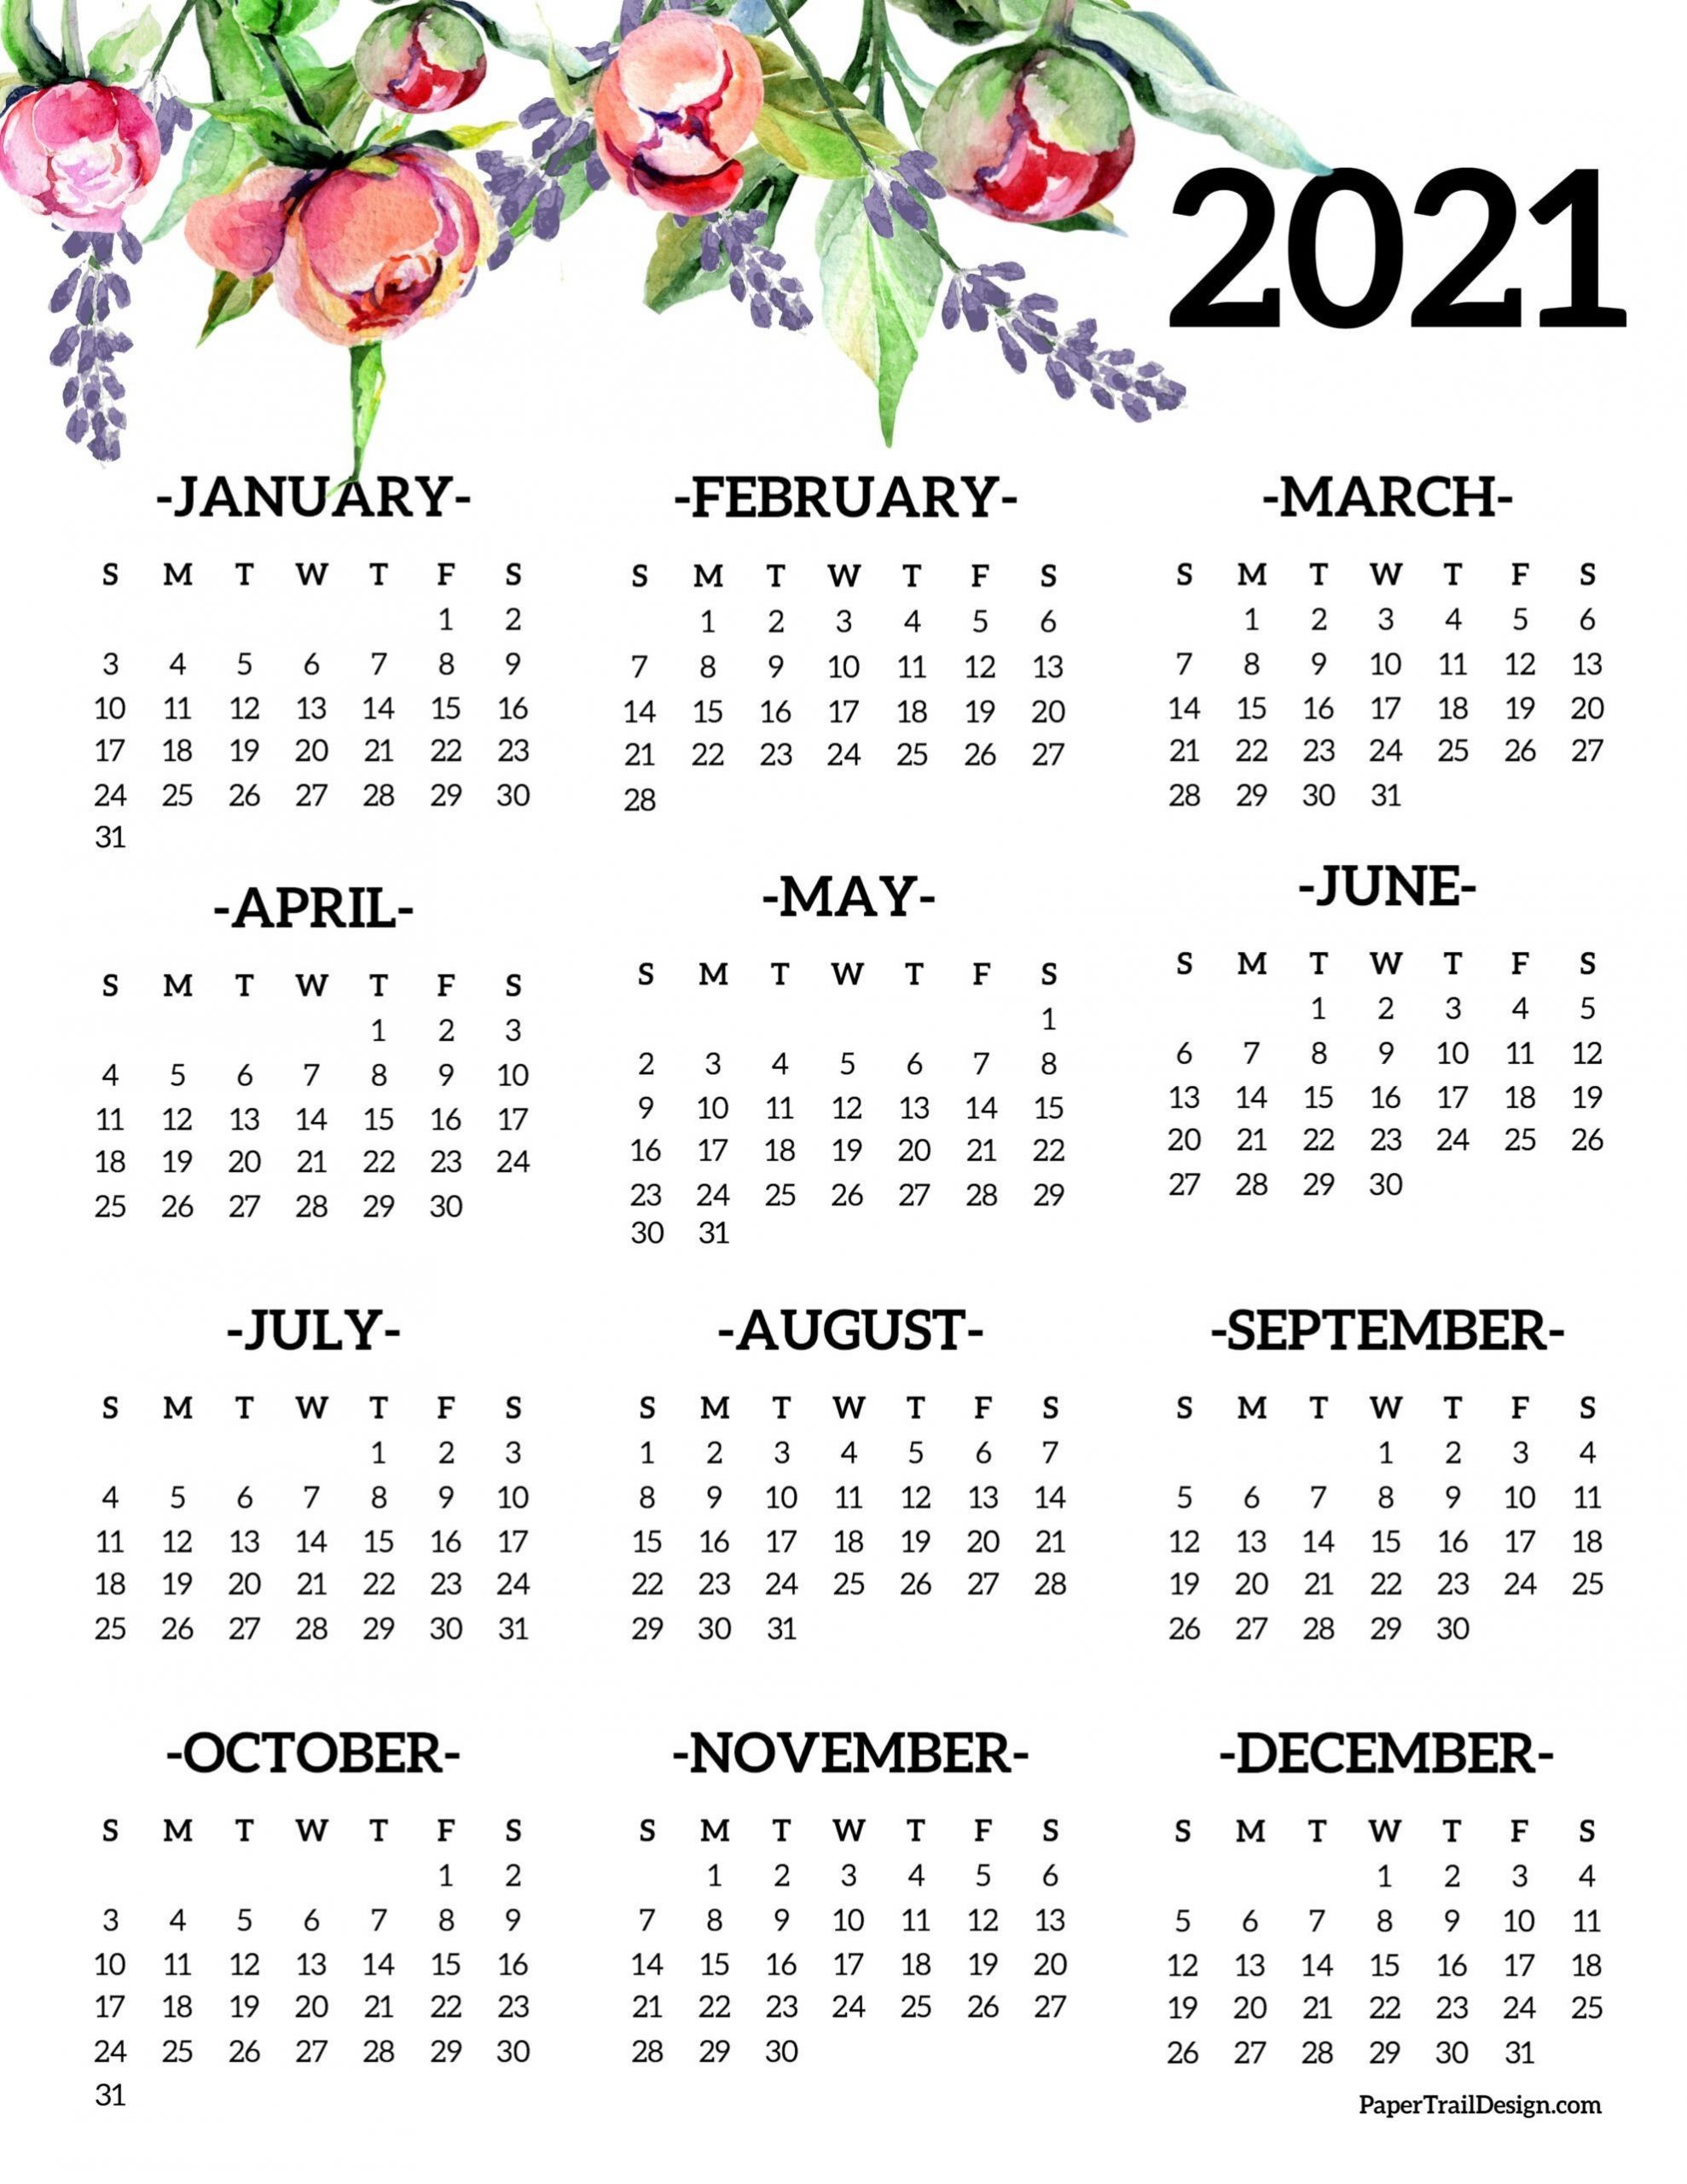 Free Printable 2021 One Page Floral Calendar | Paper Trail  2021 Calendar Printable One Page Free